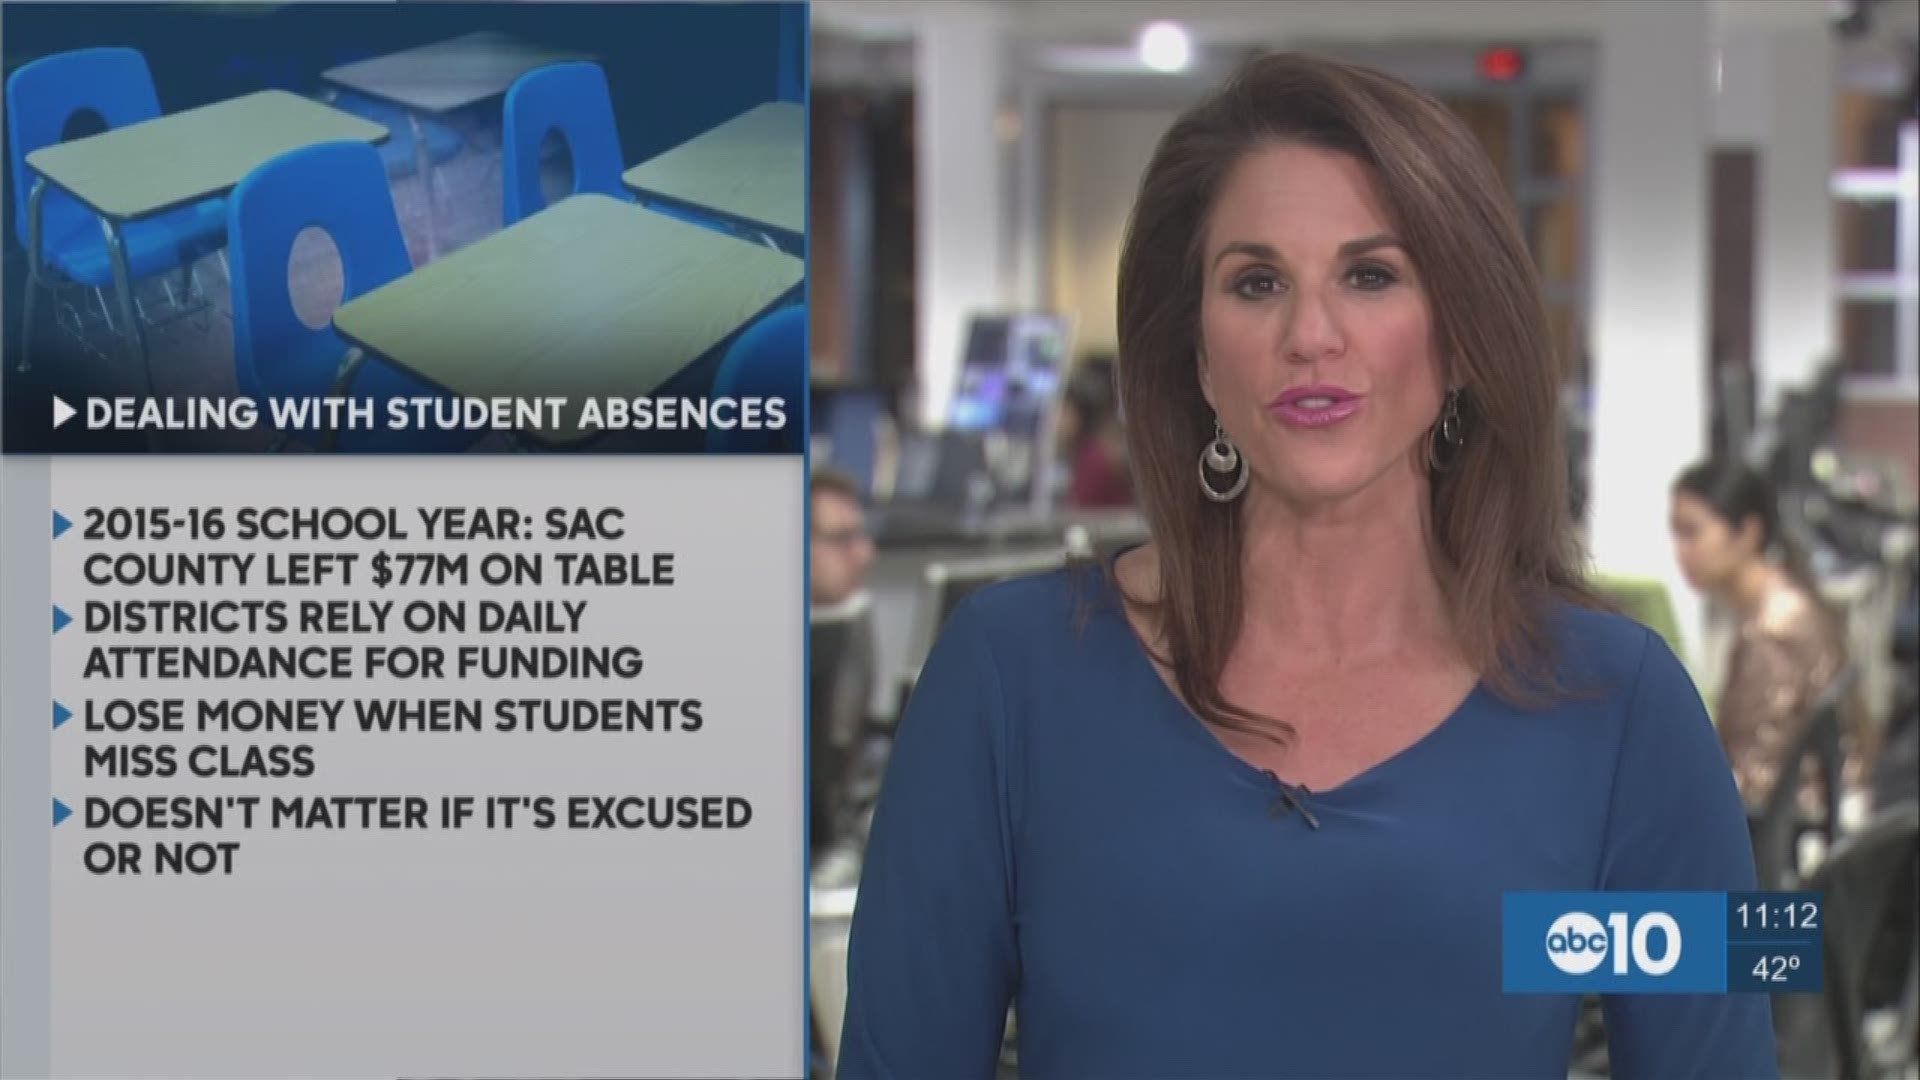 School districts in Sacramento try to curb student absences, which impact funding. 